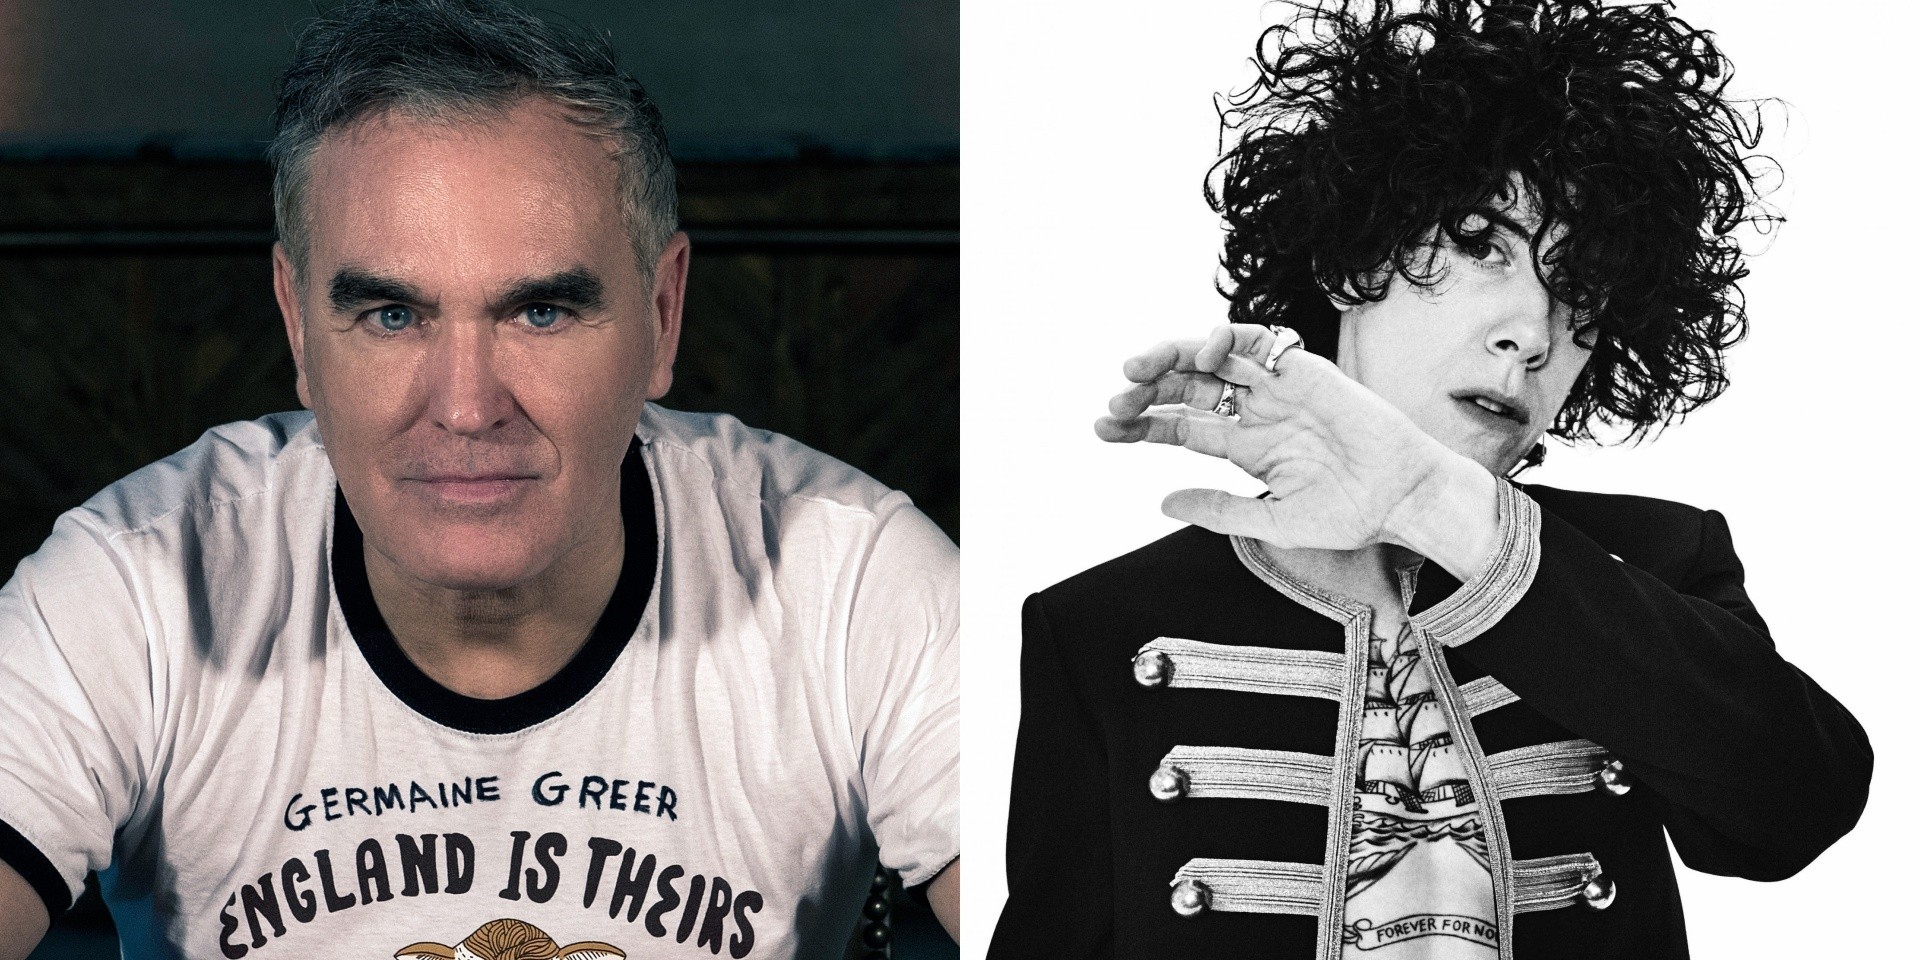 Morrissey shares Roy Orbison cover 'It's Over' featuring LP – listen